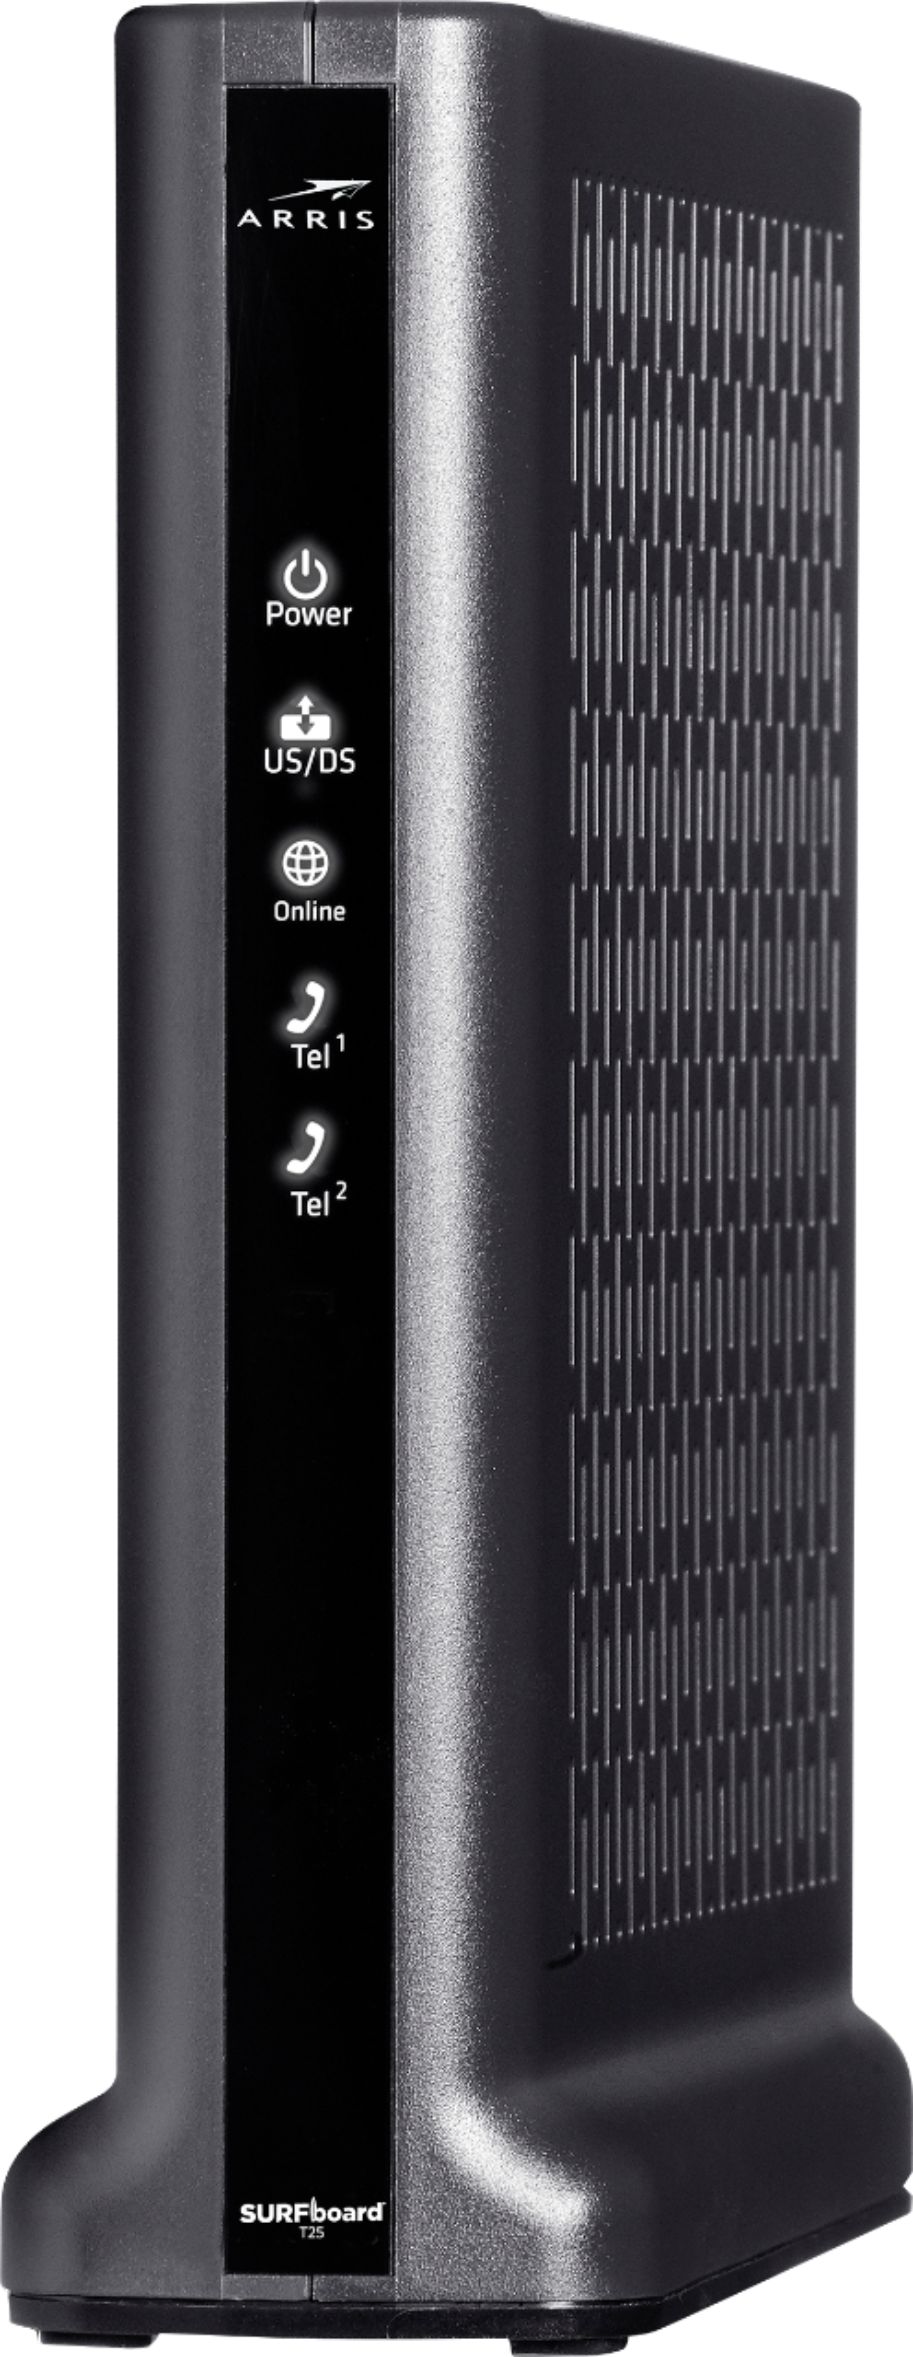 Angle View: ARRIS - SURFboard DOCSIS 3.1 Cable Modem for Xfinity Internet & Voice - Black